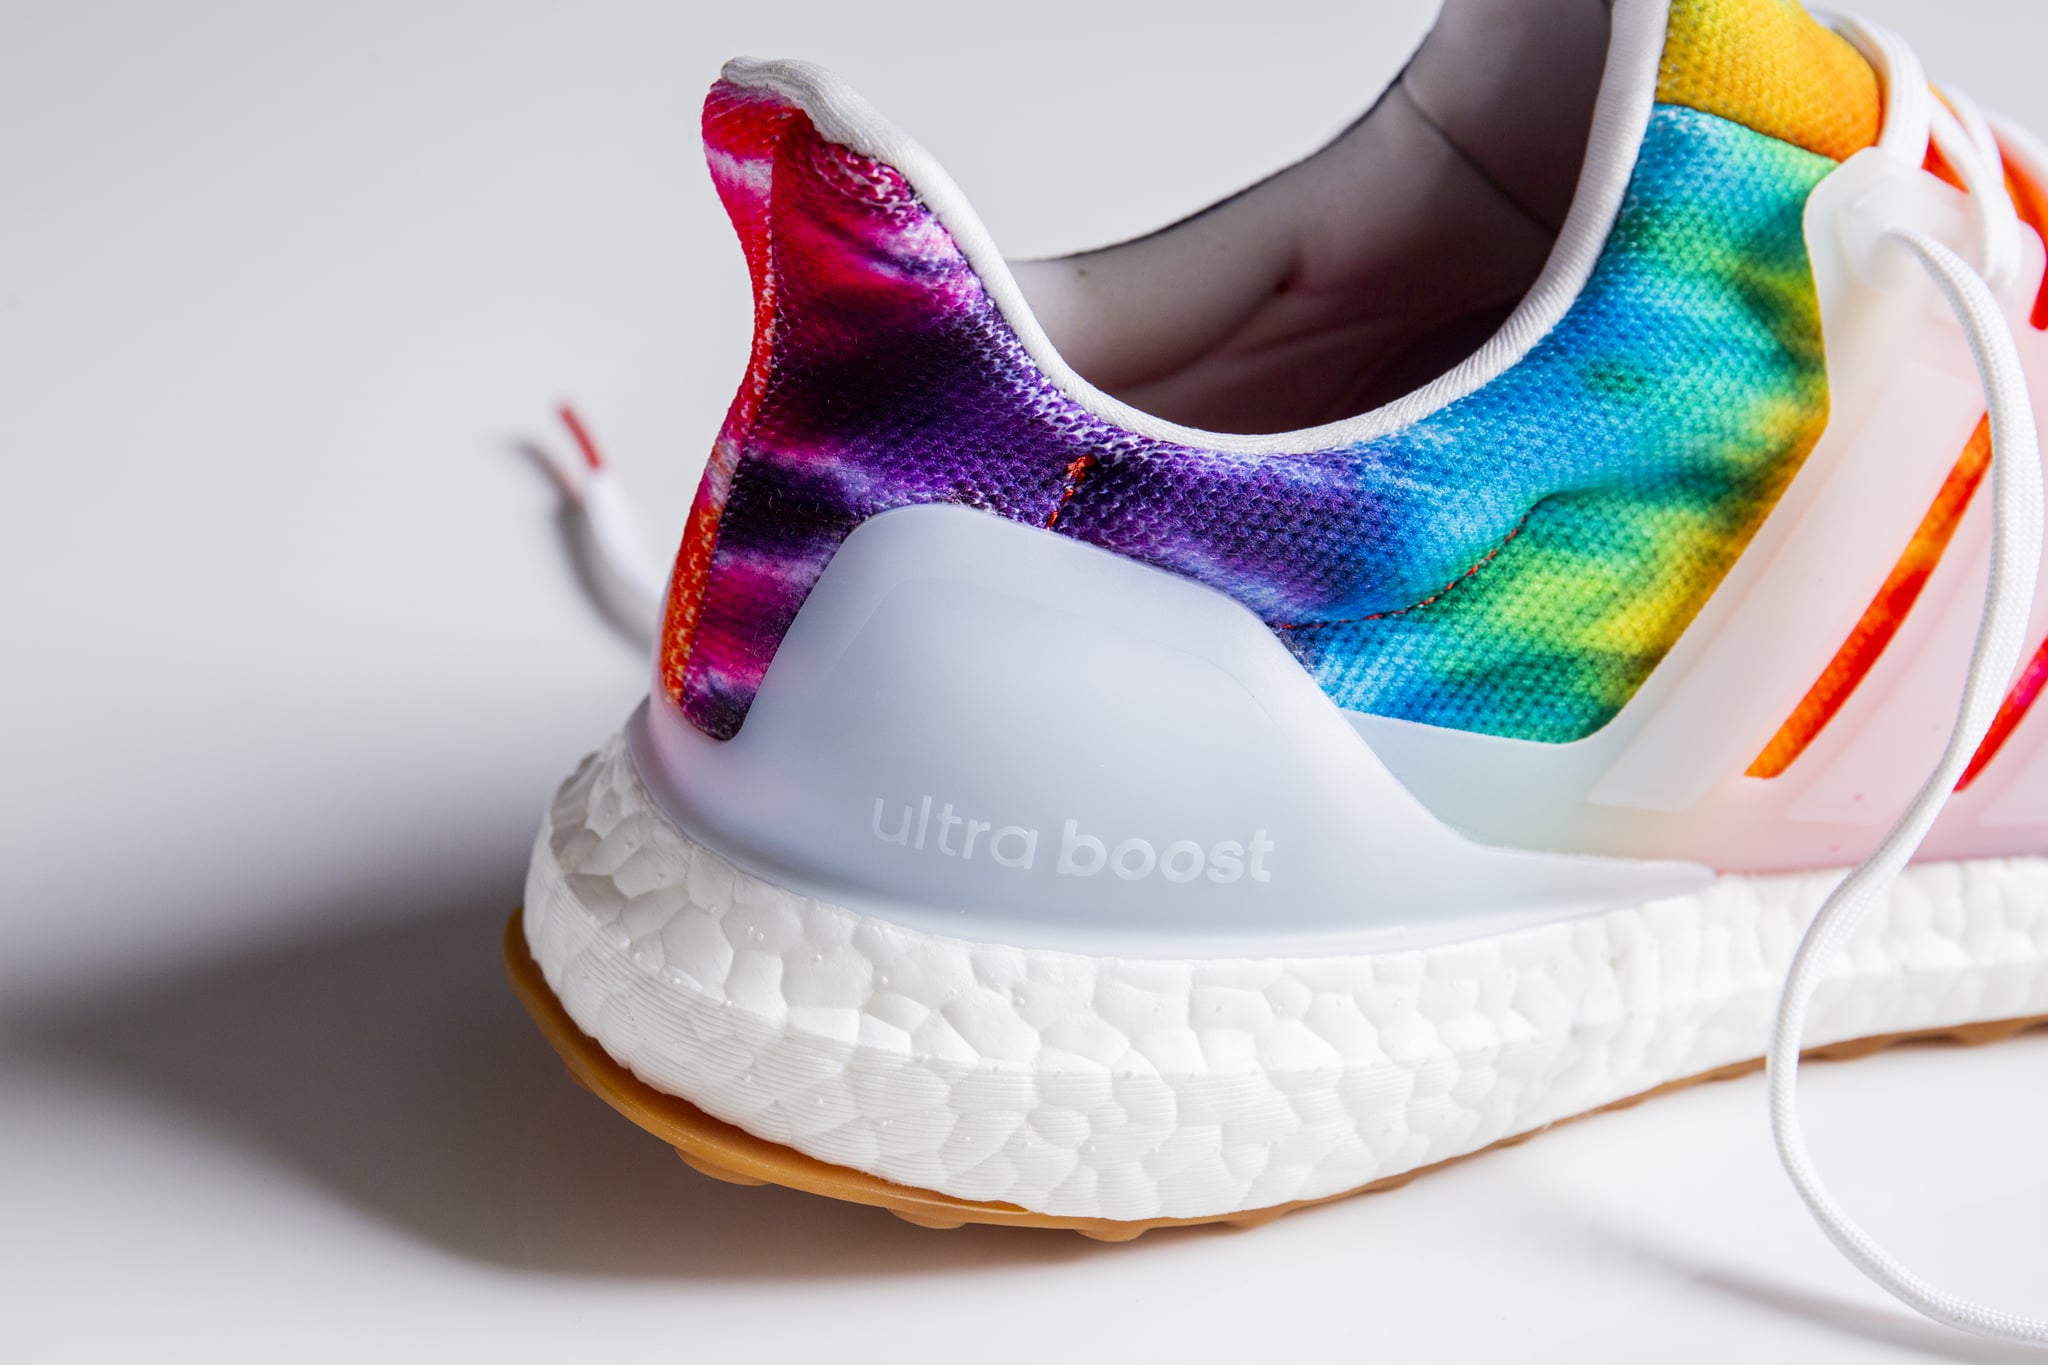 Melbourne gekruld Caius Fashion, Shopping & Style | Adidas's New Tie-Dye Ultraboost Sneakers Are  Straight Out of Our Grooviest Dreams | POPSUGAR Fashion Photo 8